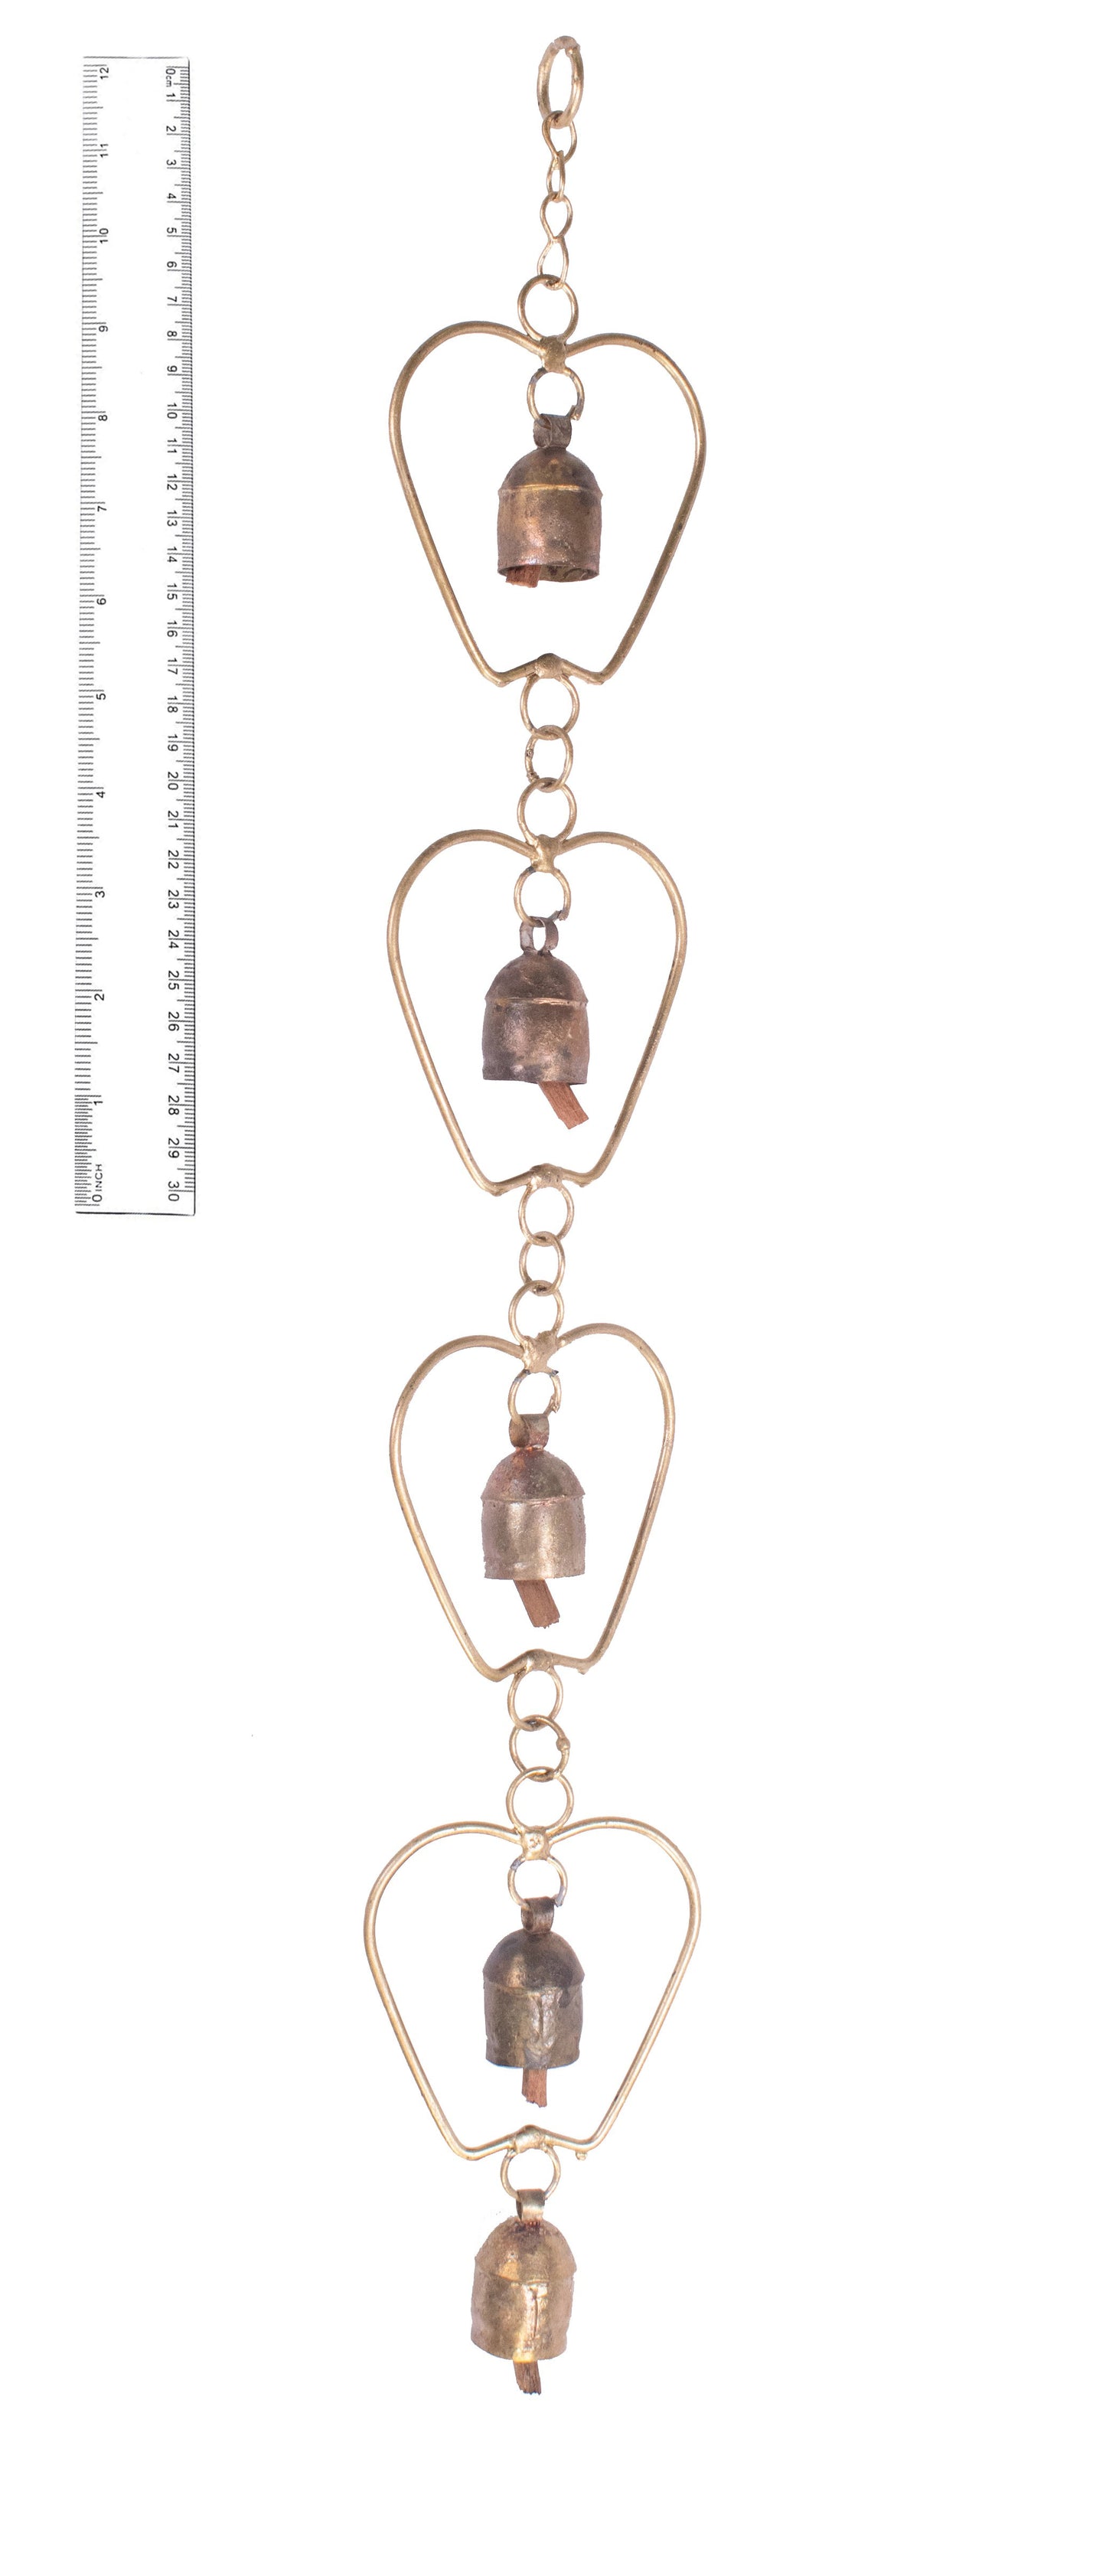 Hand Made Metal Bells Wrought Iron Copper-Zinc Coated Home Décor Chimes Cow Bell   - Apples Series - 5 Bells  -  SKU: 0068